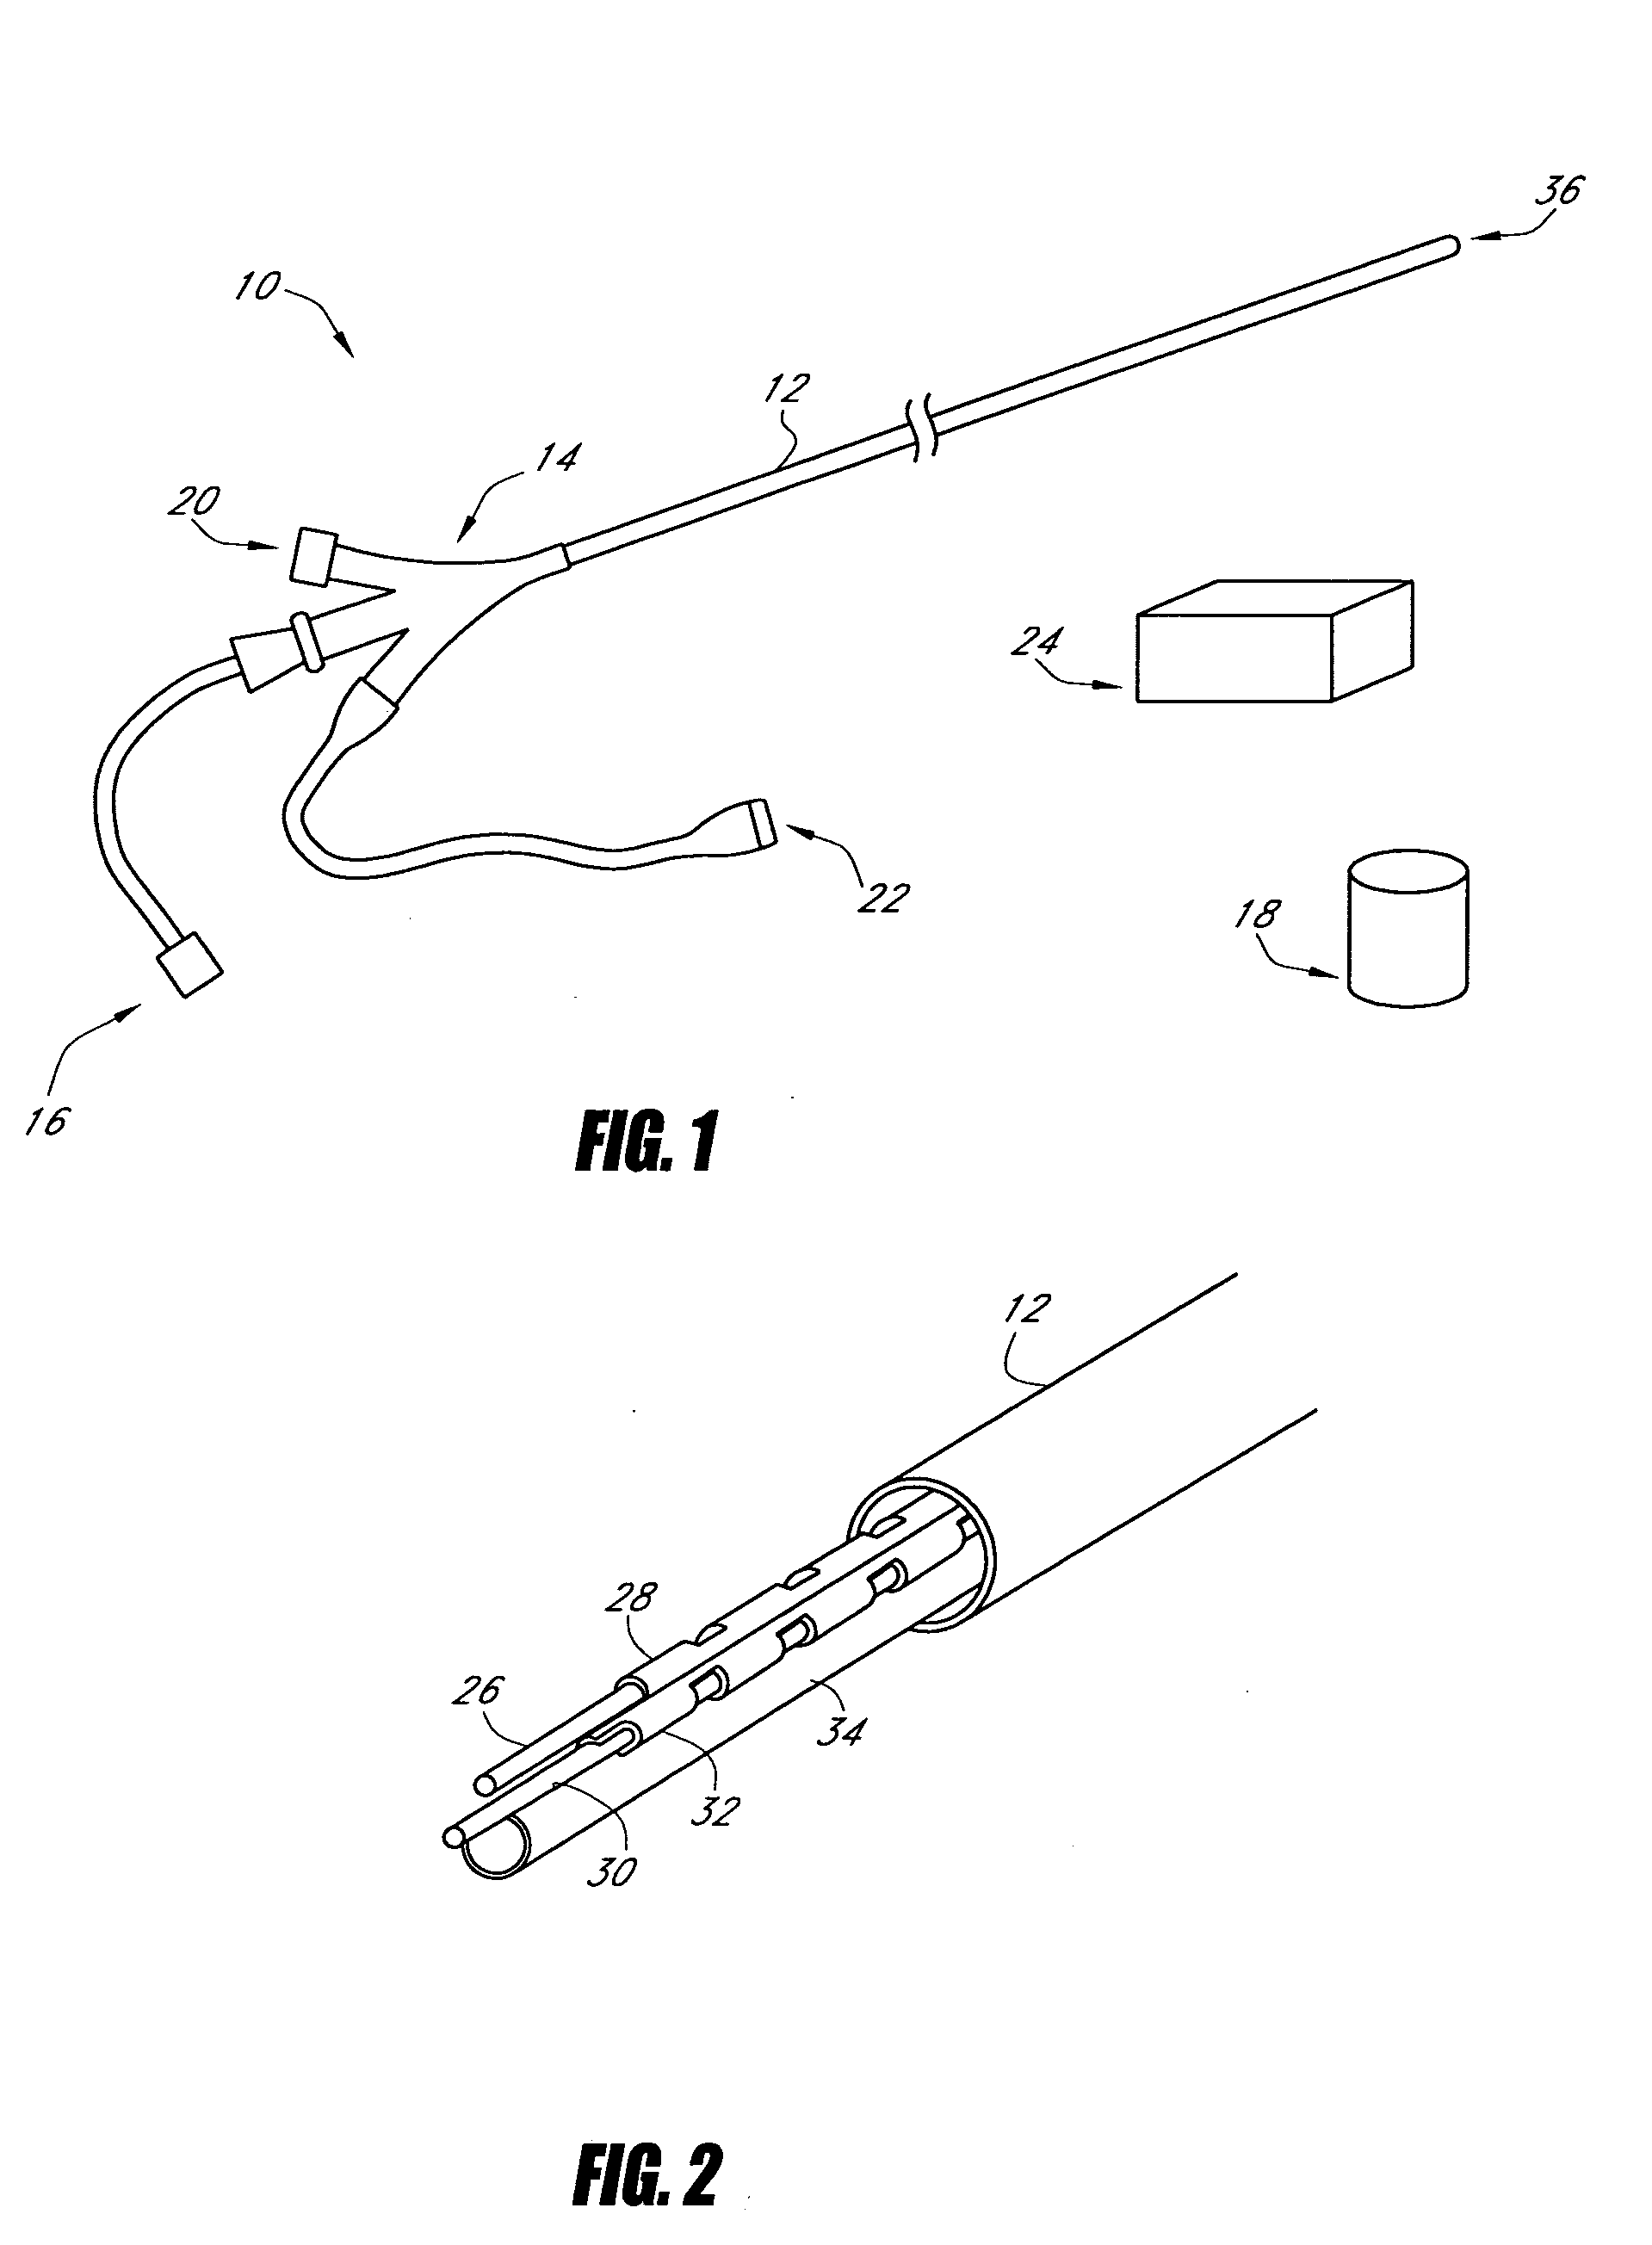 Methods and apparatus for treatment of hollow anatomical structures